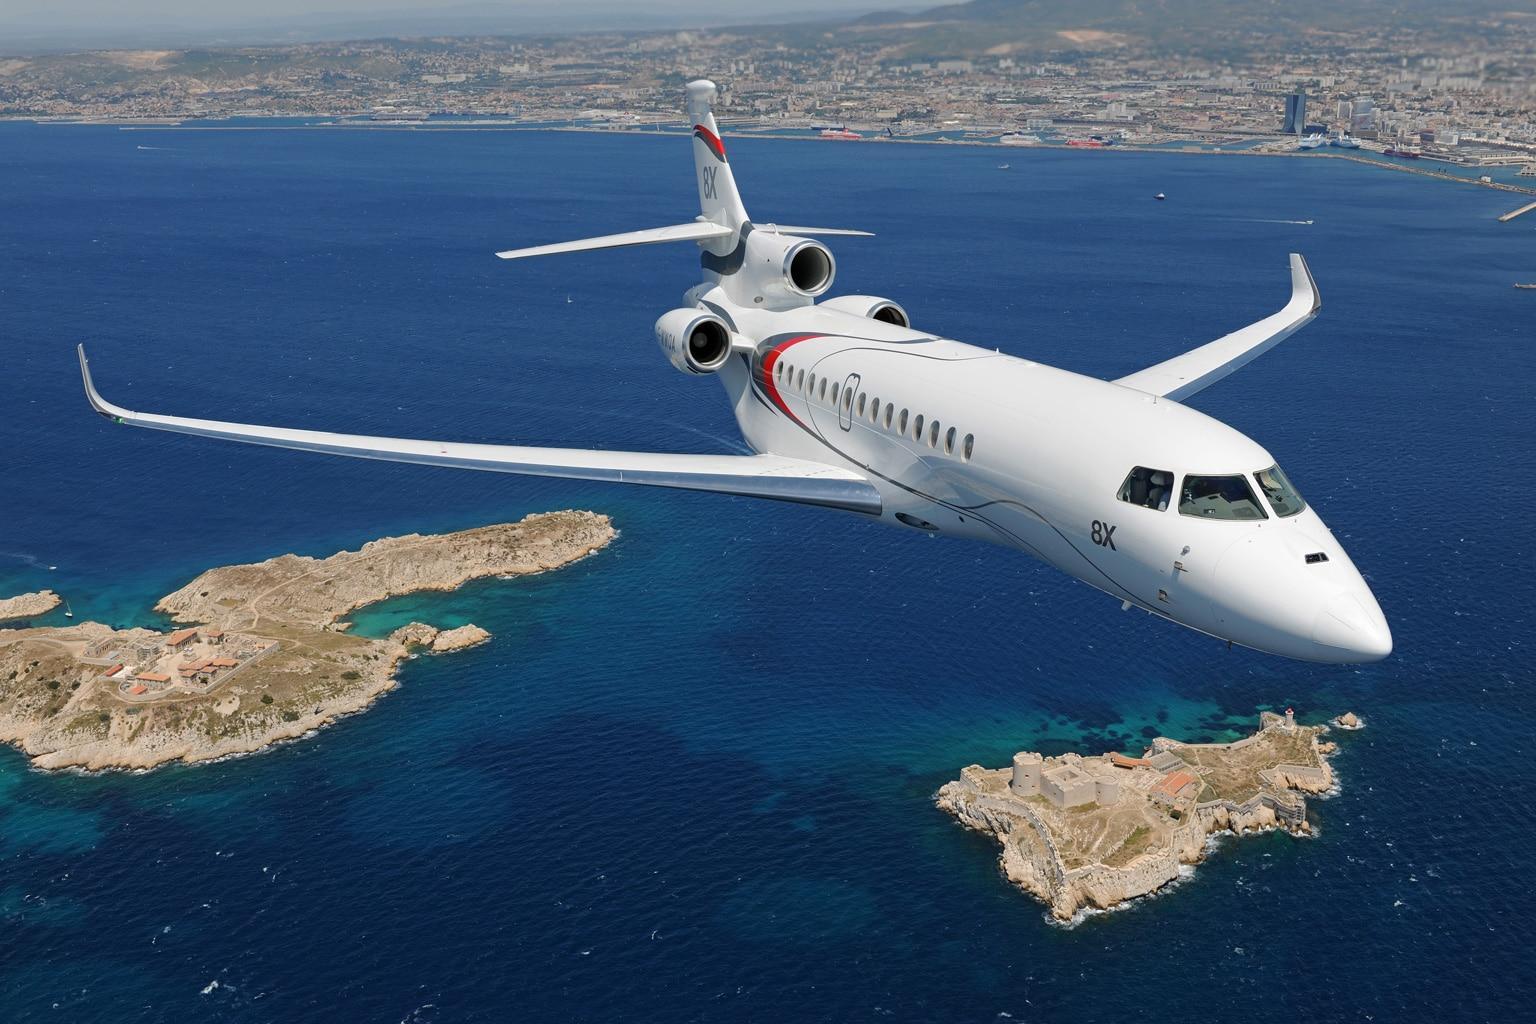 Dassault to Showcase Falcon Model Line, Regional Support Network at Singapore Airshow